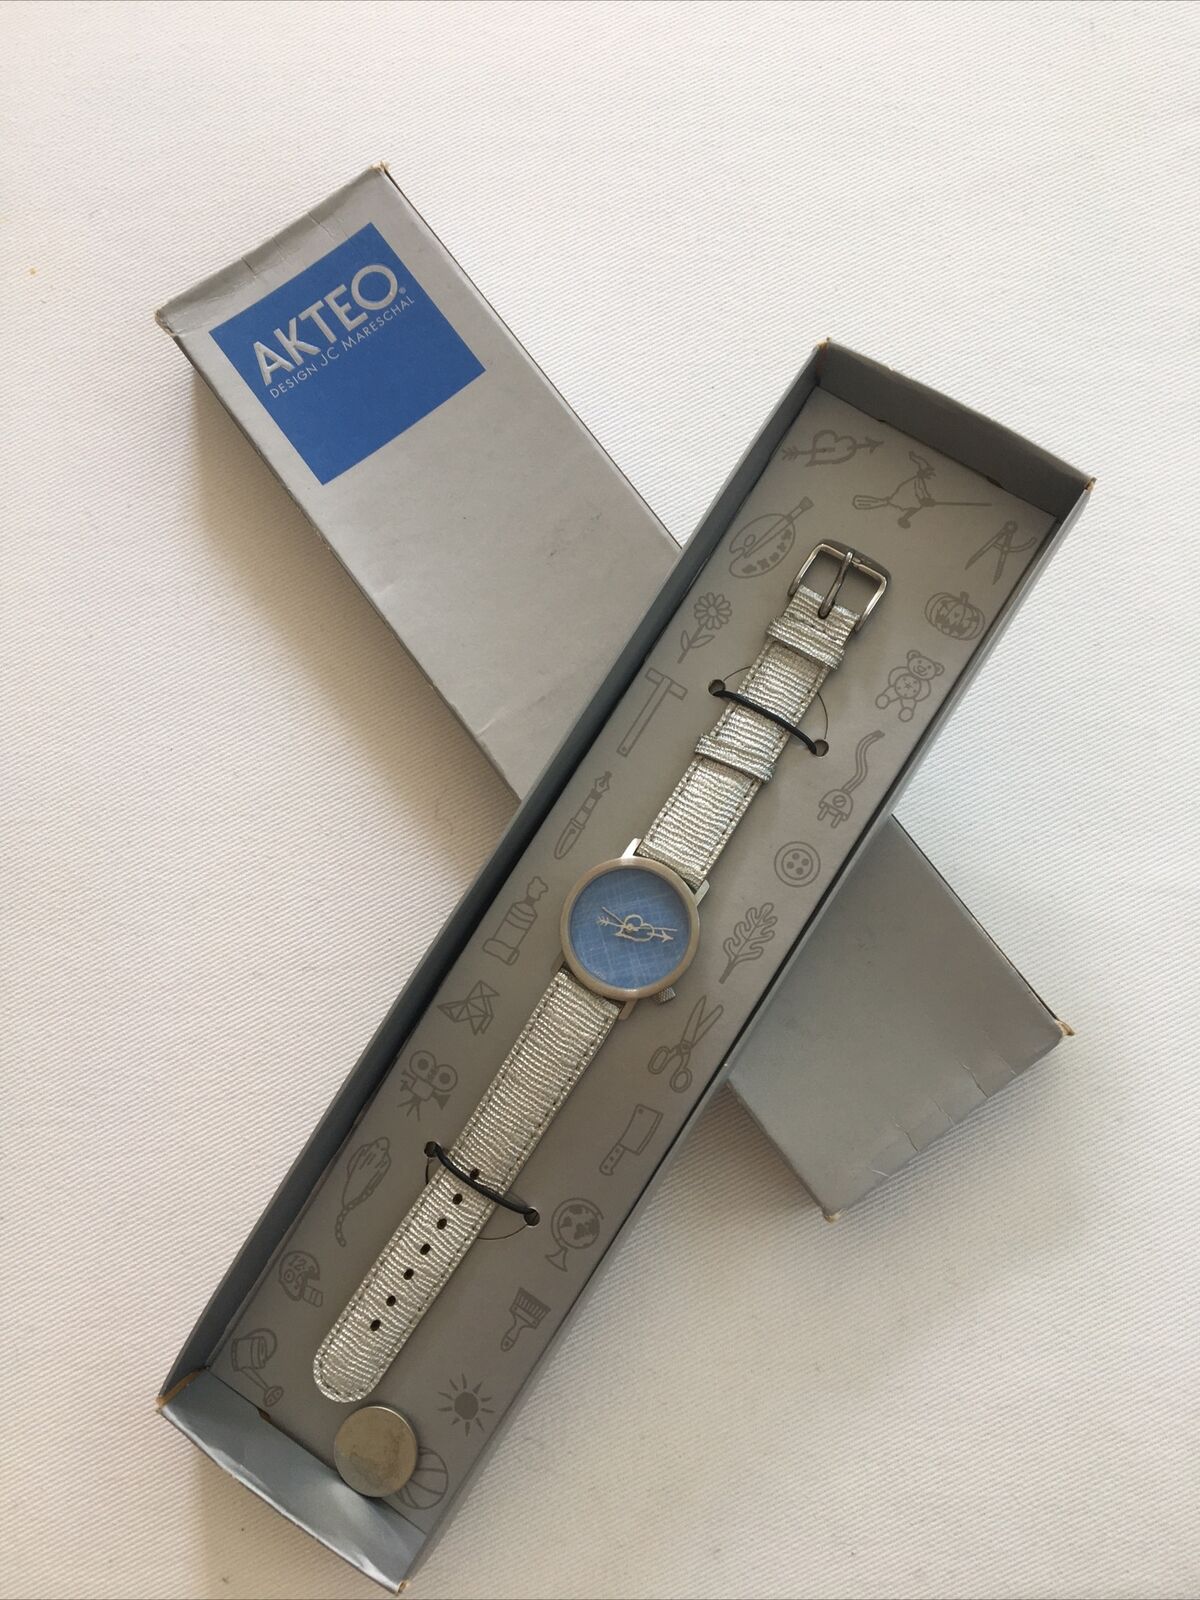 Akteo watch - Very original - Made in France